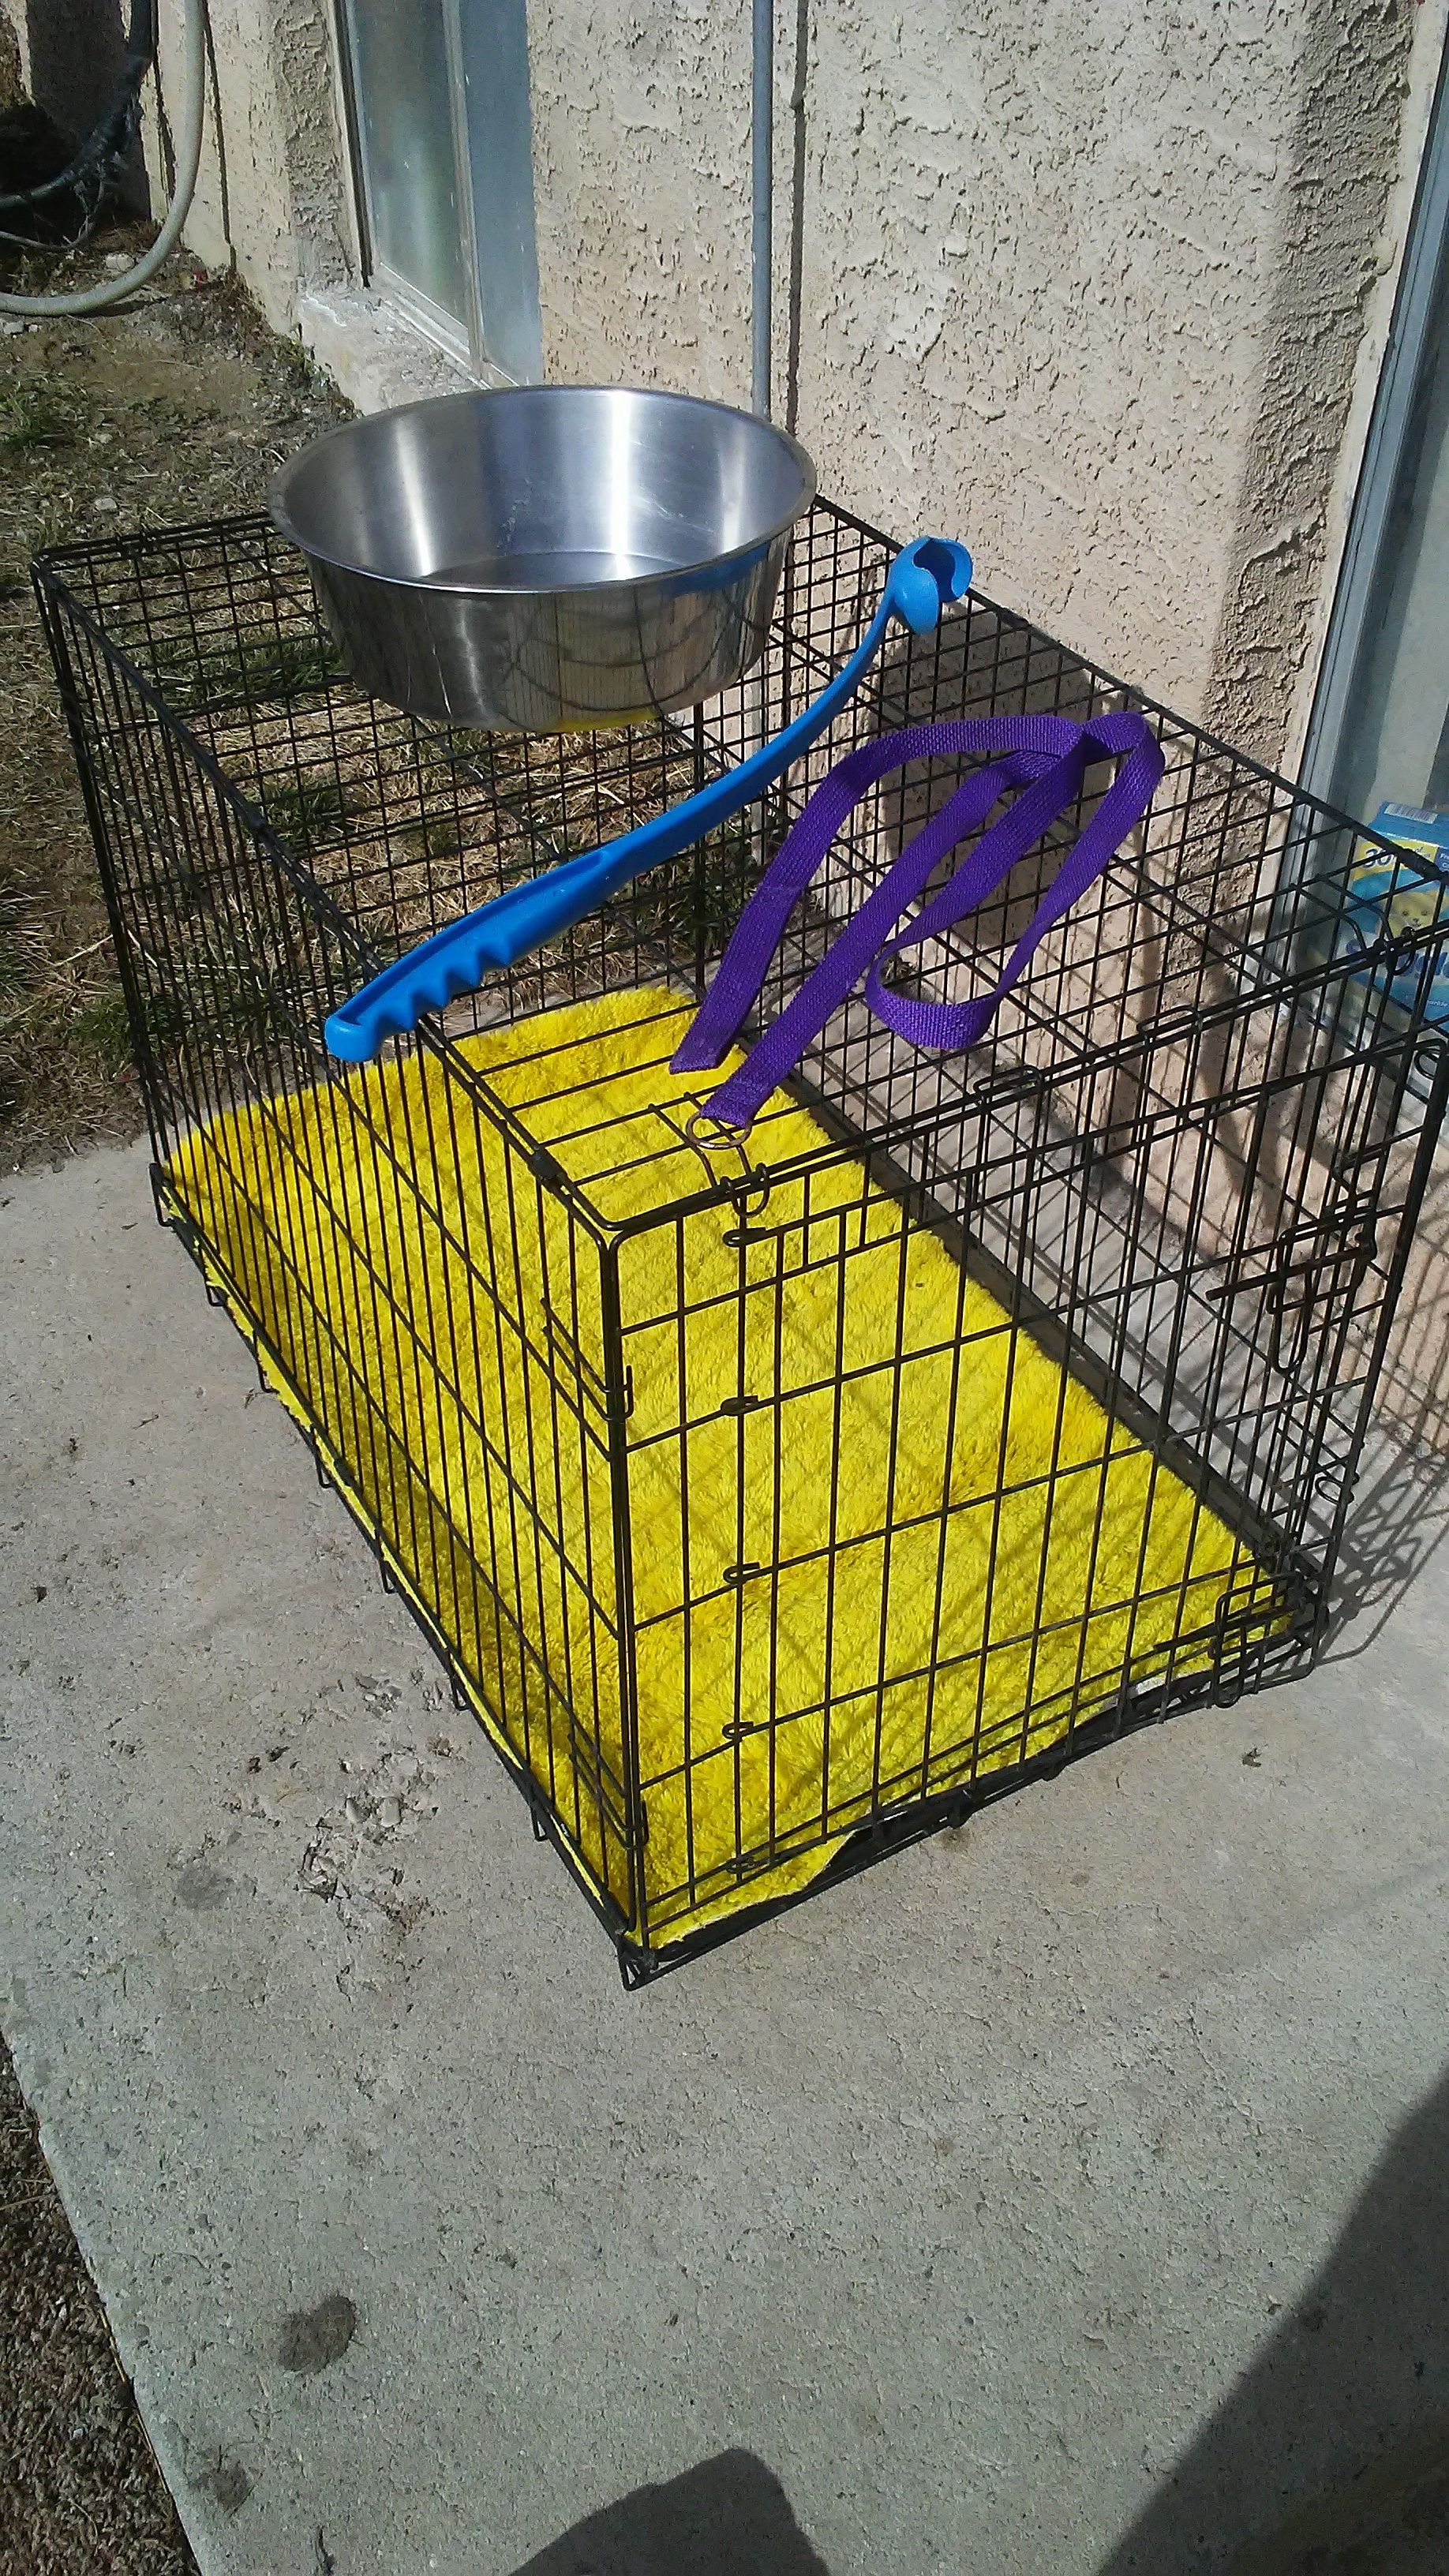 Large Dog crate w/ yellow rug, water bowl, leash, and toy